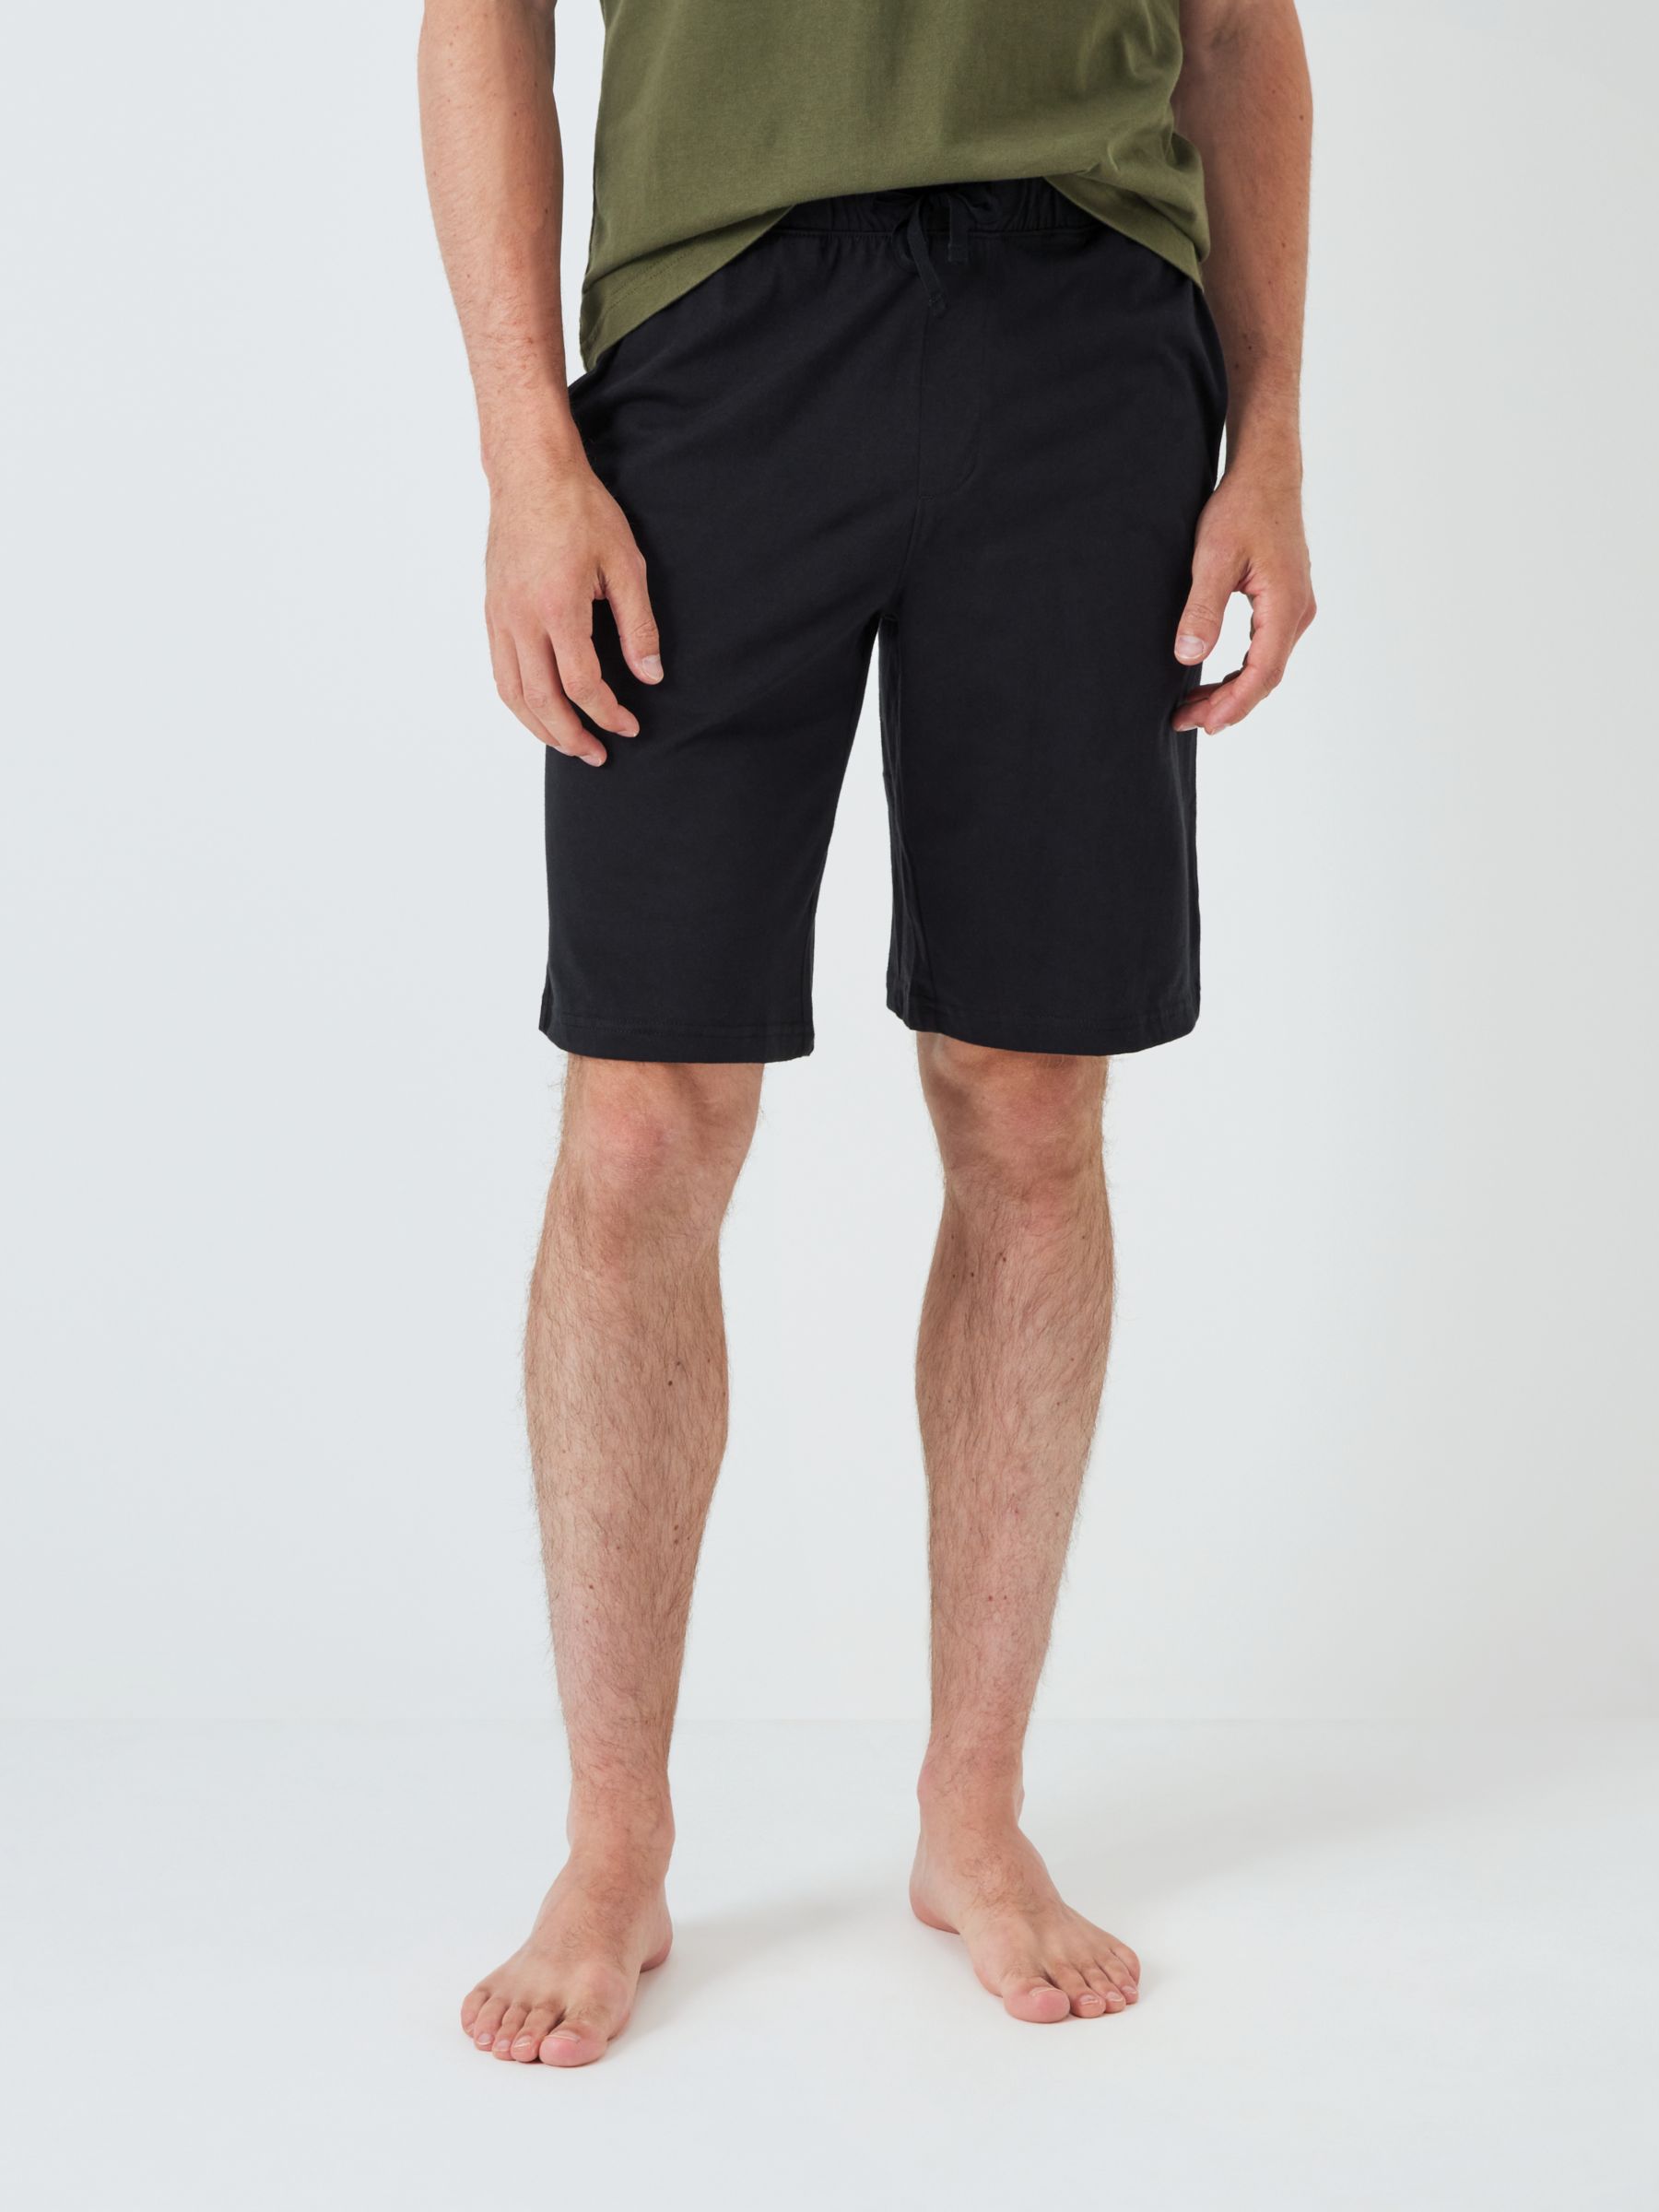 John Lewis ANYDAY Cotton Jersey Shorts, Pack of 2, Black/Grey, XL